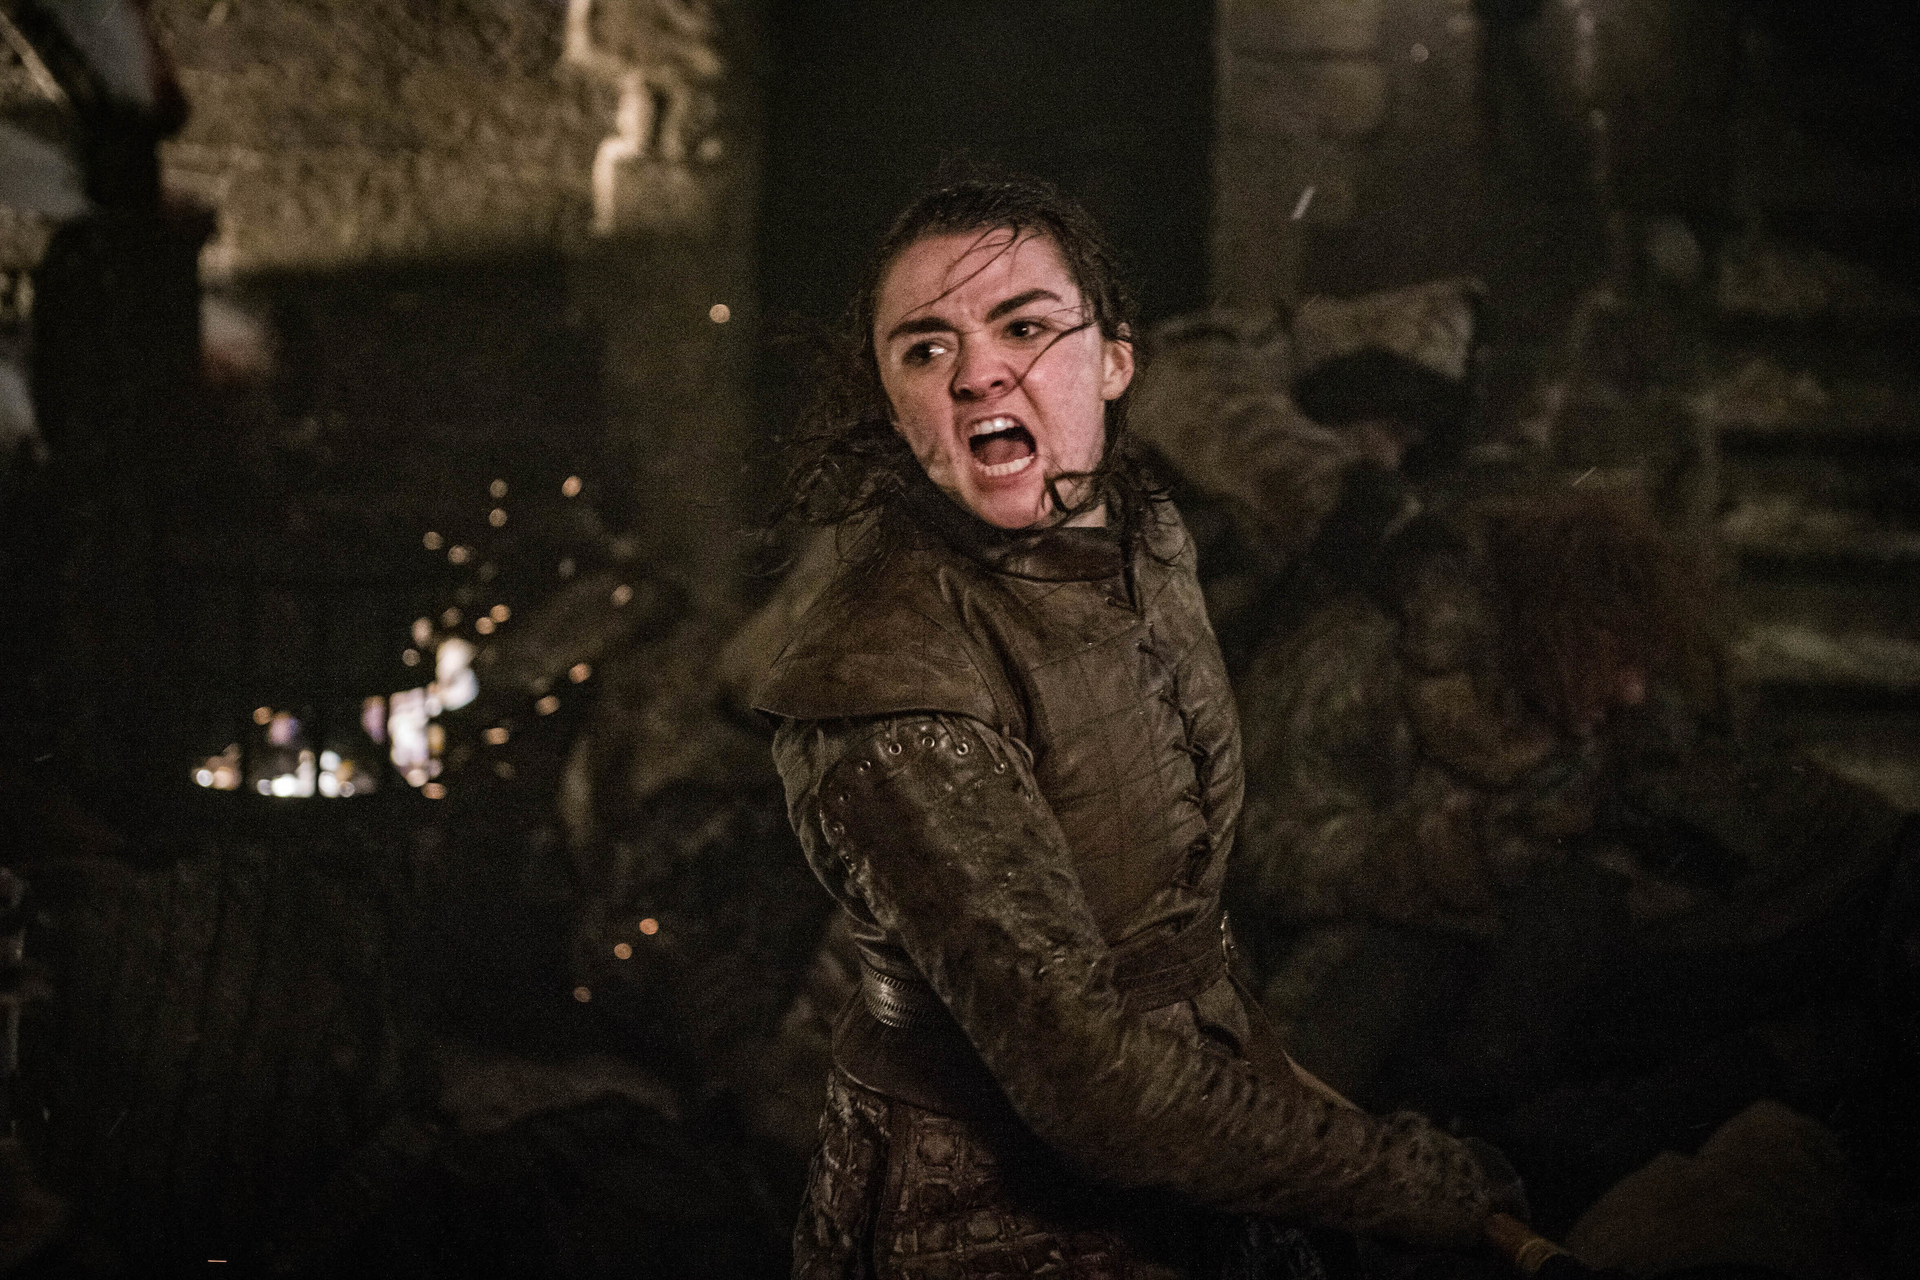 Maisie Williams as Arya Stark in an intense scene with a battle backdrop